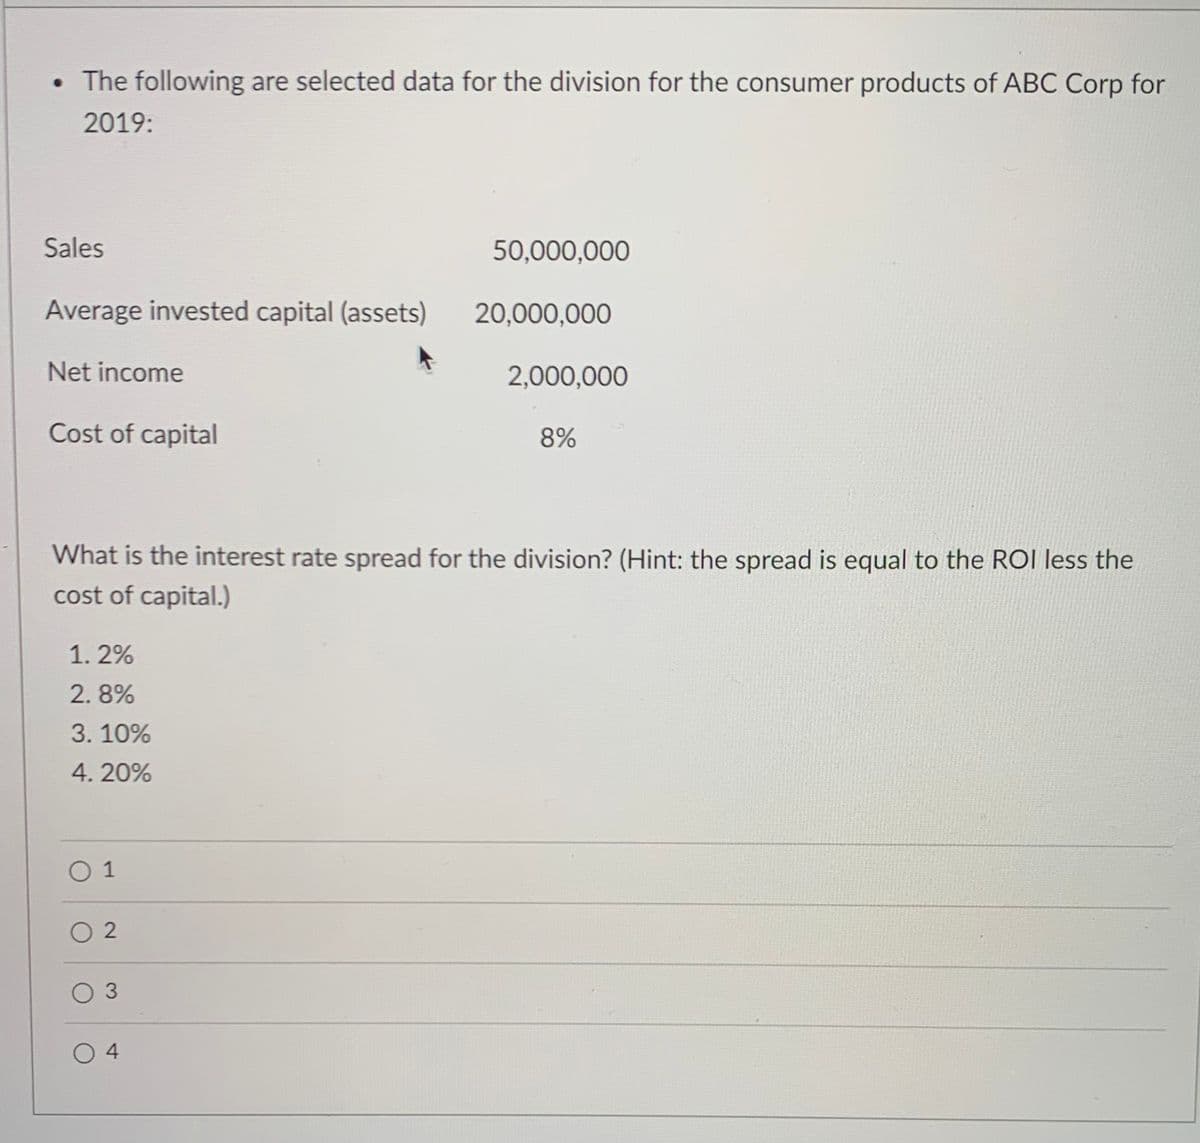 • The following are selected data for the division for the consumer products of ABC Corp for
2019:
Sales
50,000,000
Average invested capital (assets)
20,000,000
Net income
2,000,000
Cost of capital
8%
What is the interest rate spread for the division? (Hint: the spread is equal to the ROI less the
cost of capital.)
1. 2%
2. 8%
3. 10%
4. 20%
0 1
O 3
0 4
